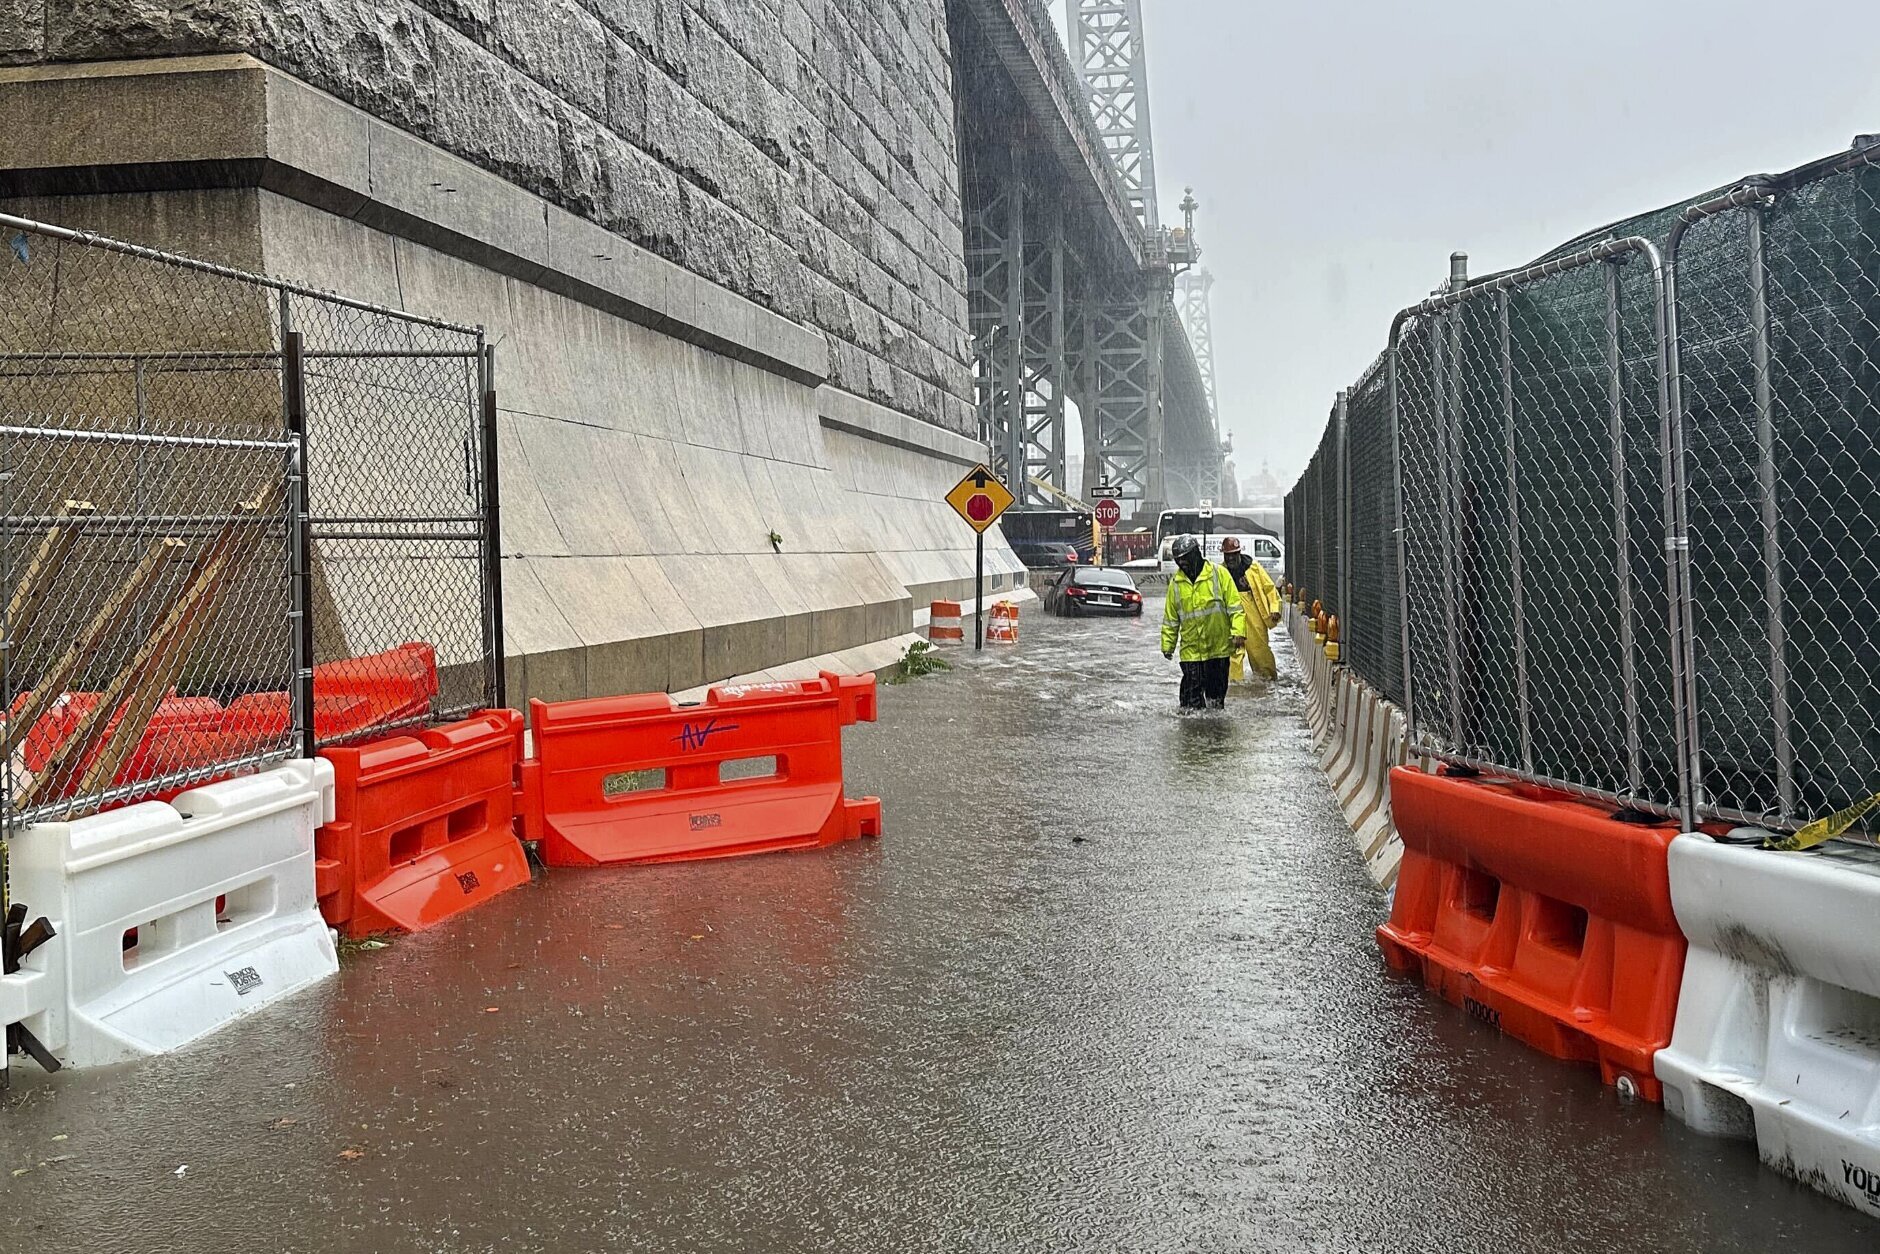 New York City area under state of emergency after storms flood subways,  strand people in cars - WTOP News